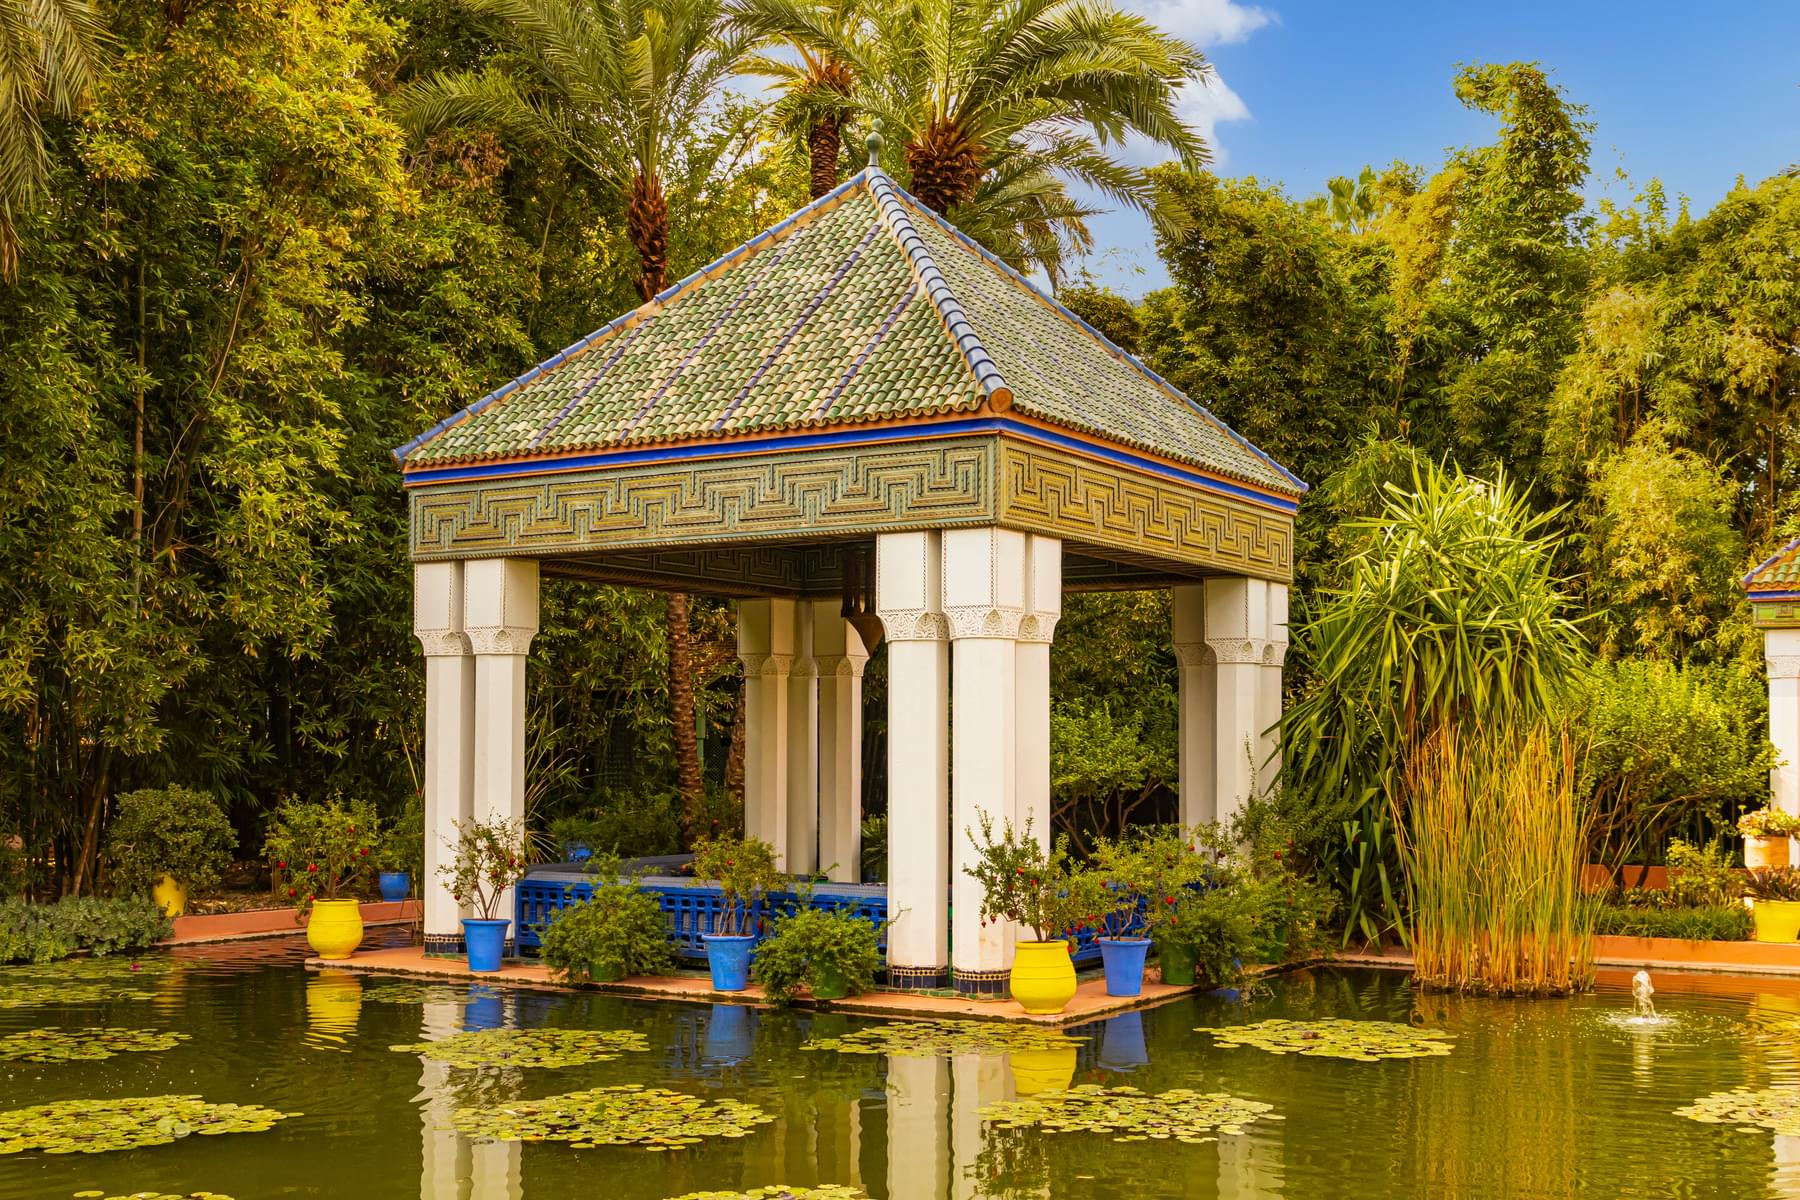  Stroll serenely through the enchanting Jardin Majorelle and revel in its breathtaking beauty